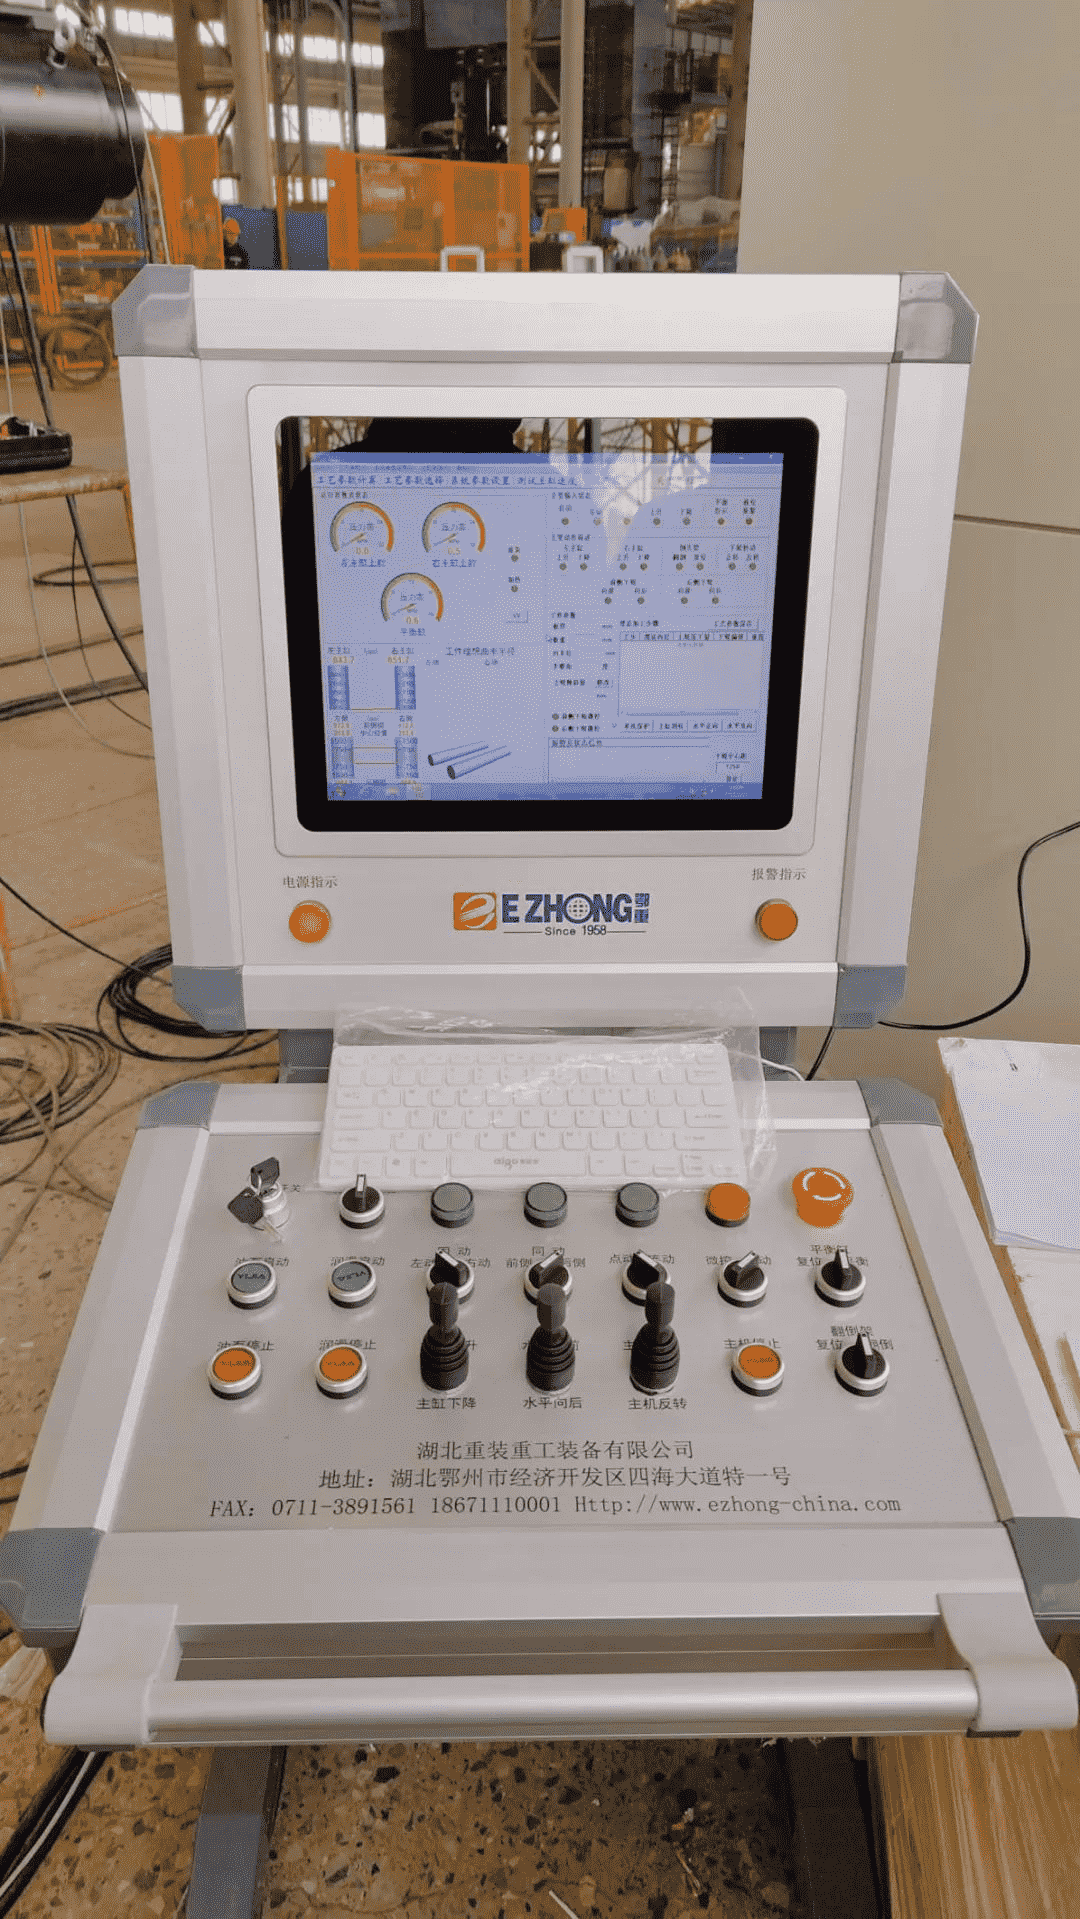 cnc plate rolling machine control system